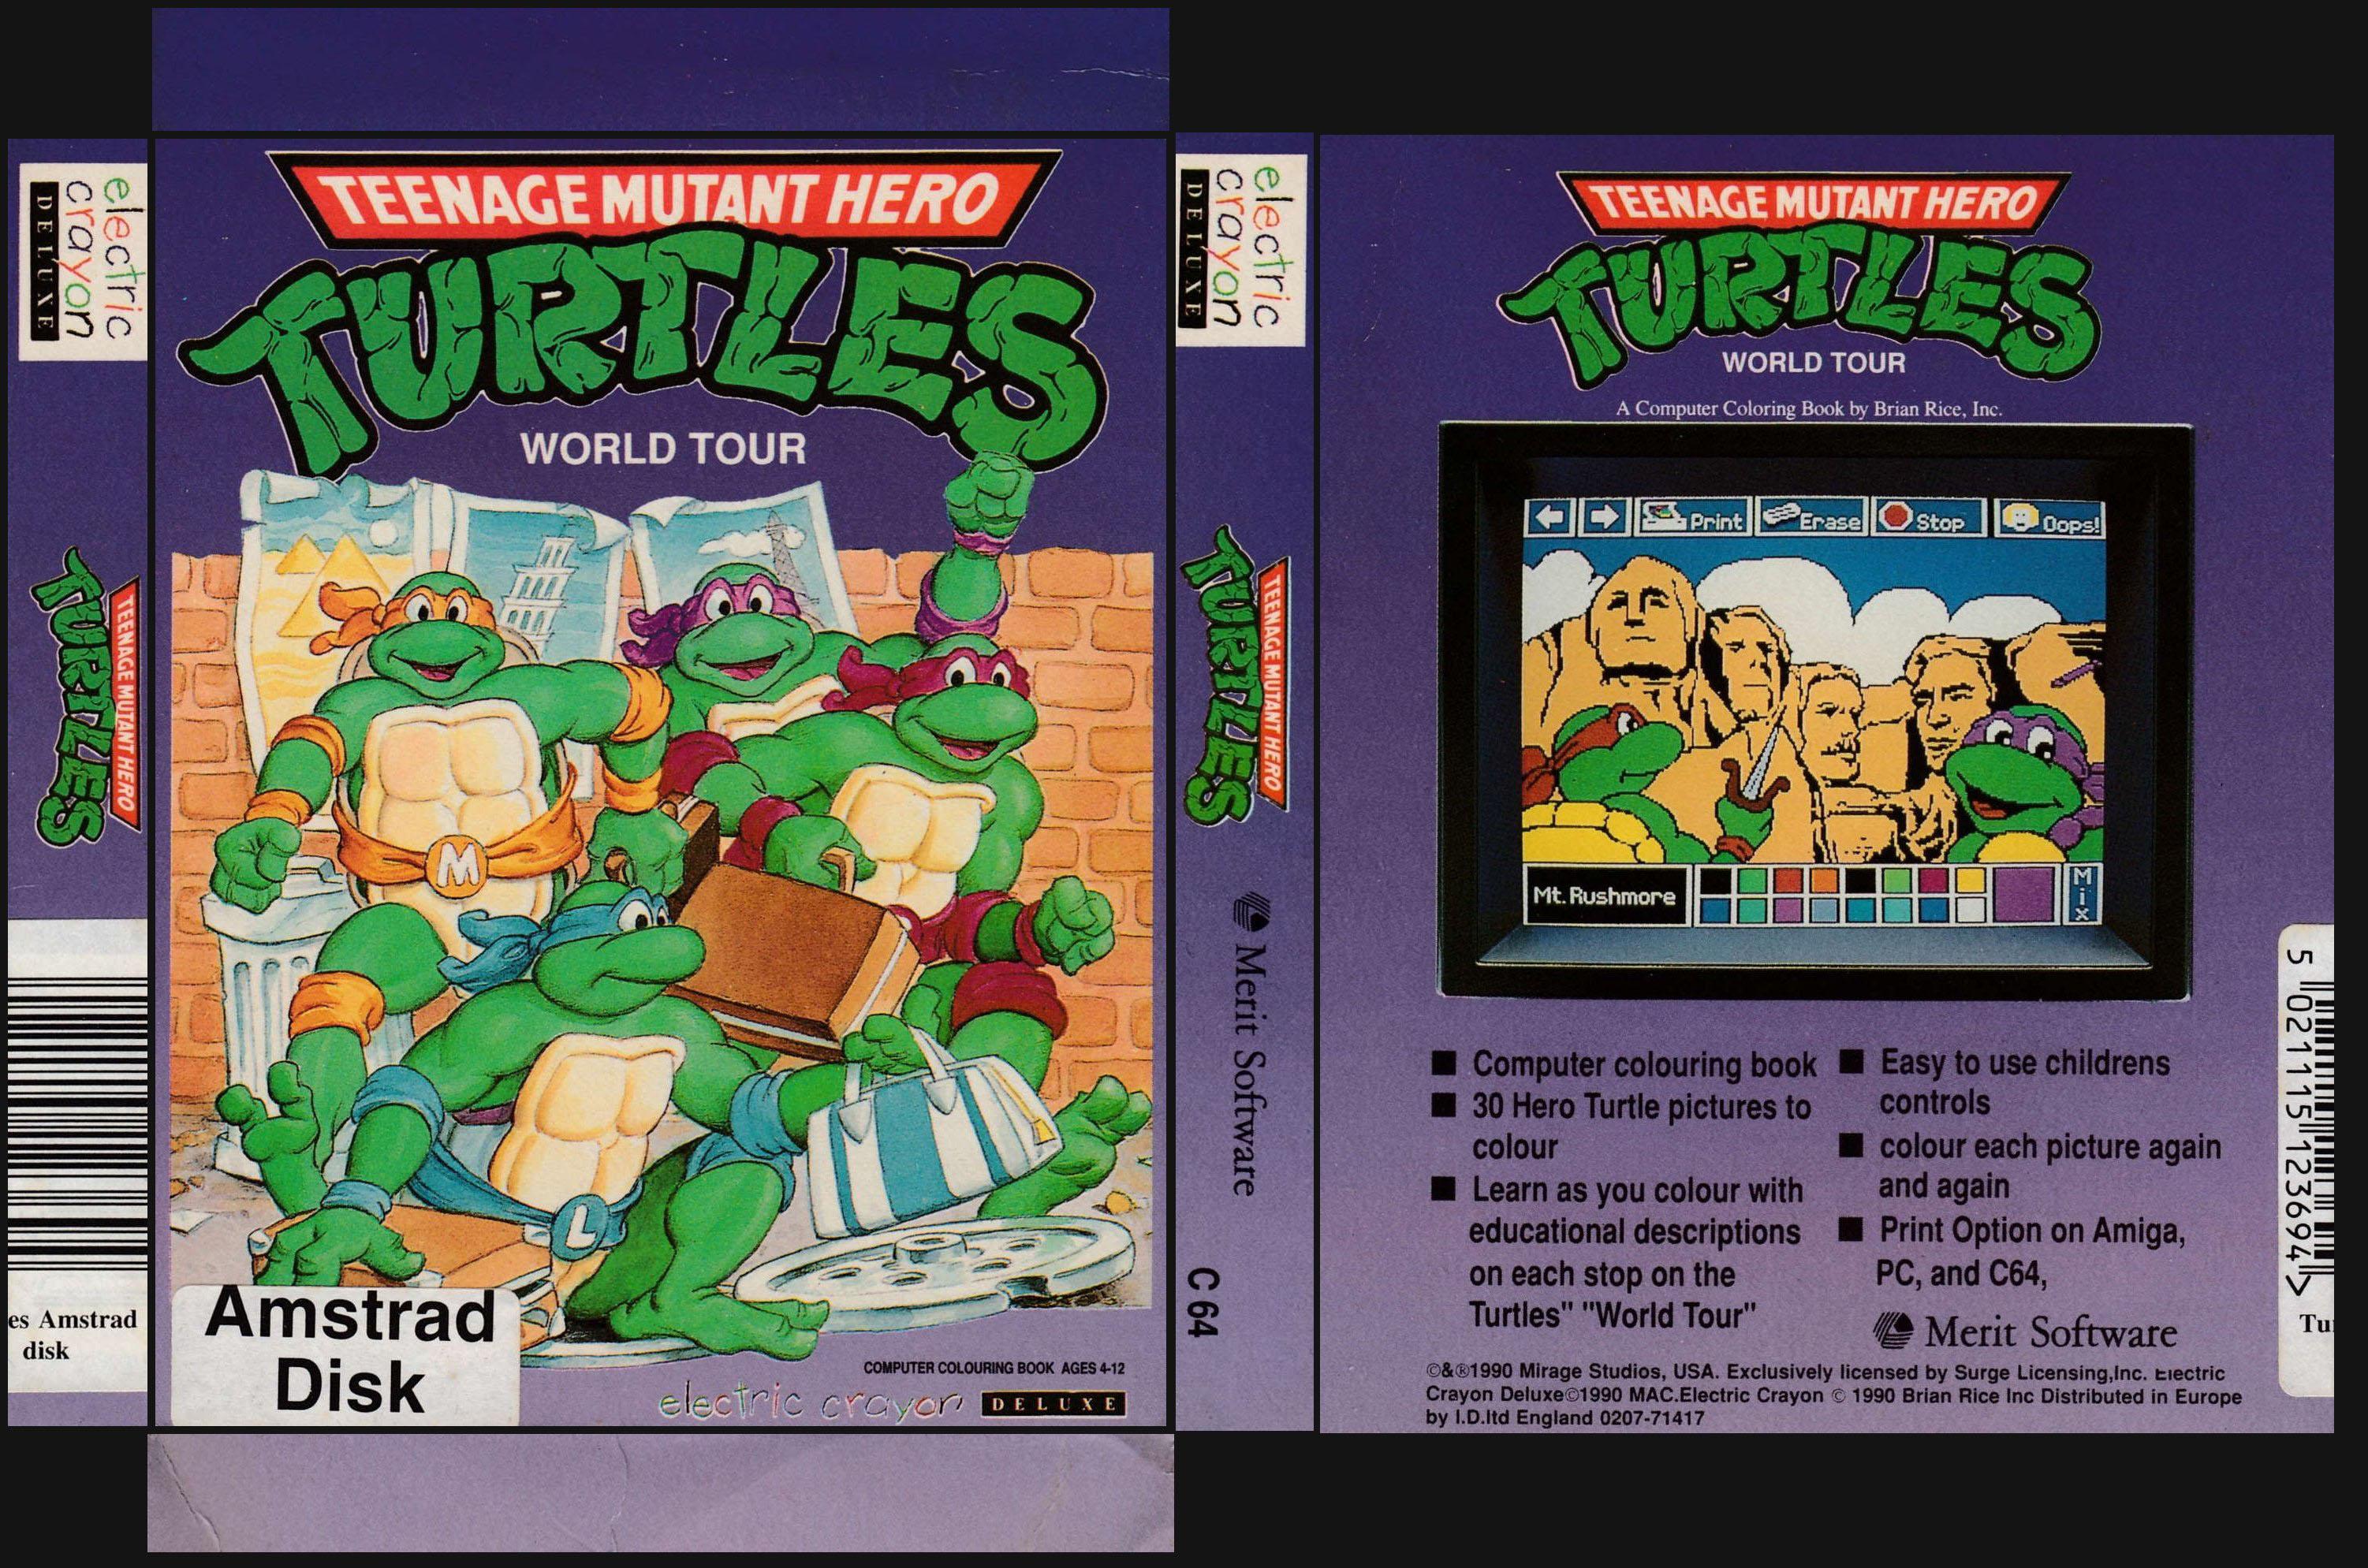 Teenage Mutant Hero Turtles World Tour Release DISK ENGLISHDATE 2016 09 07 DL 33 fois TYPE image SIZE 286Ko NOTE Uploaded by CPCLOV w1979 h1103 · 